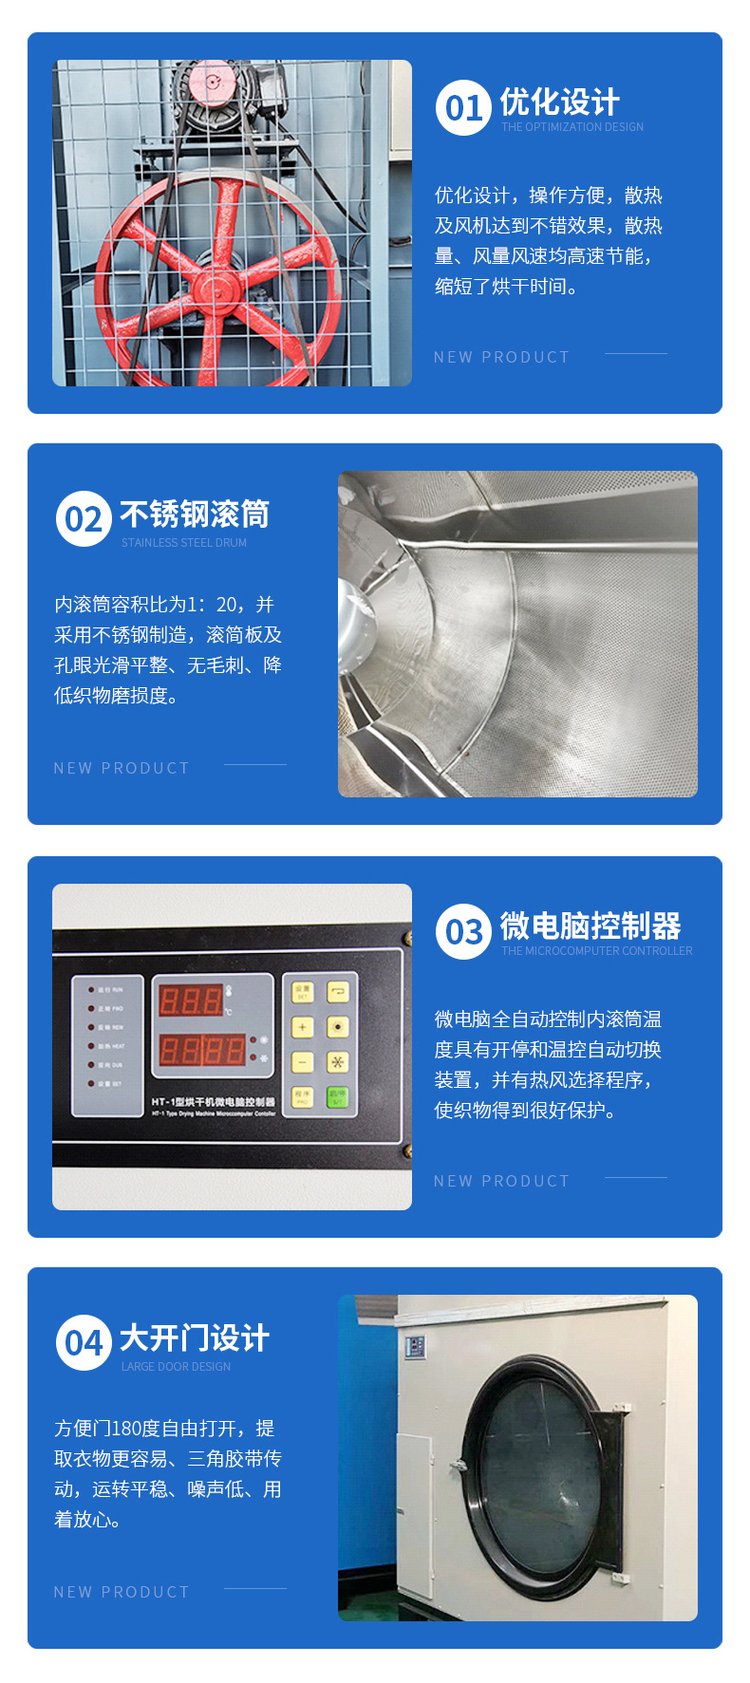 Longhai brand 50kg work clothes dryer, garment factory sample making, garment electric heating and drying oven